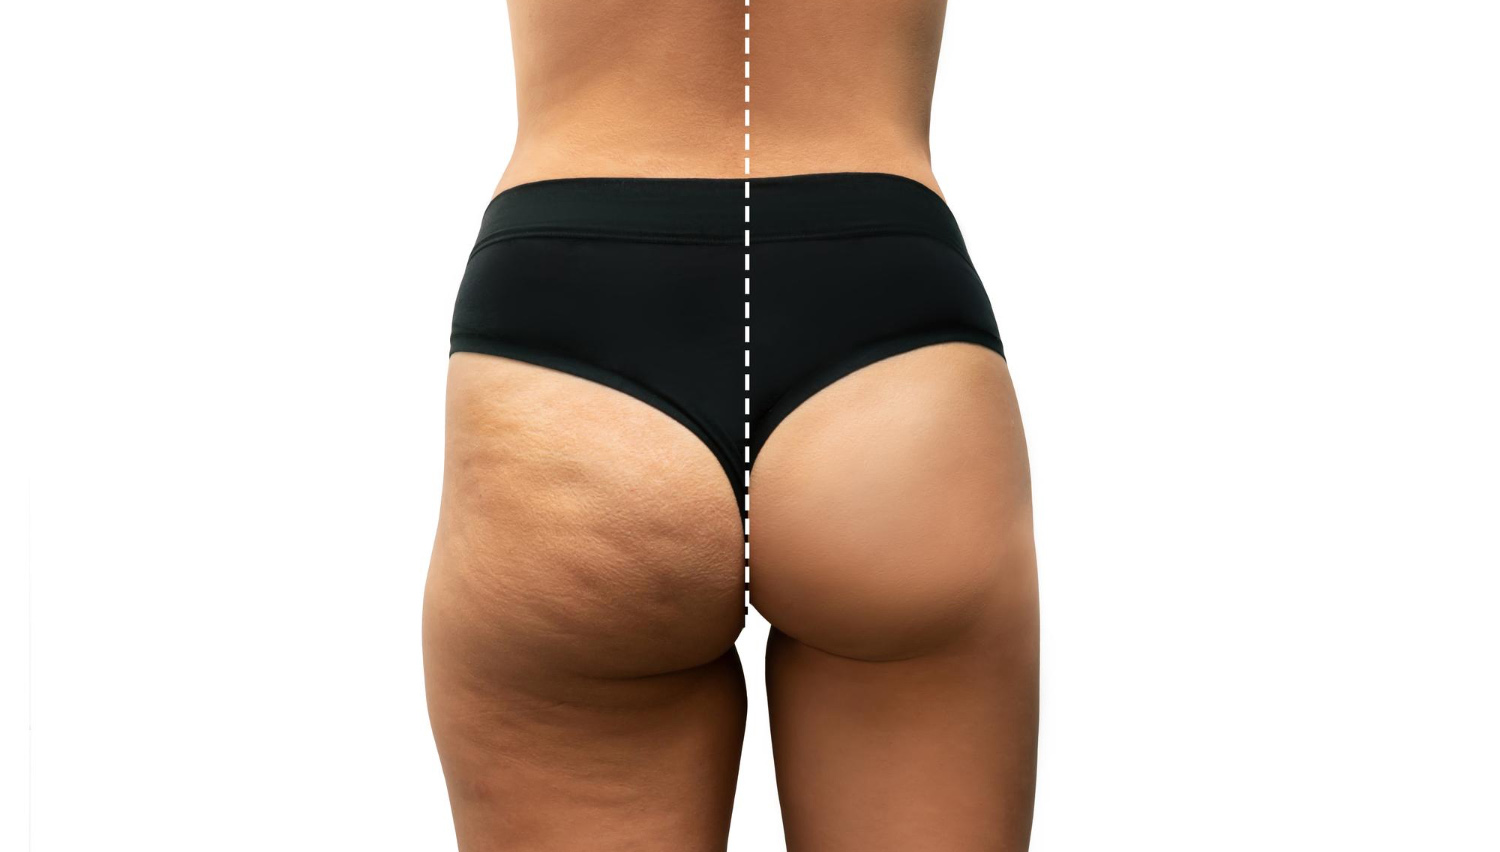 What is Brazilian Buttock Lift?